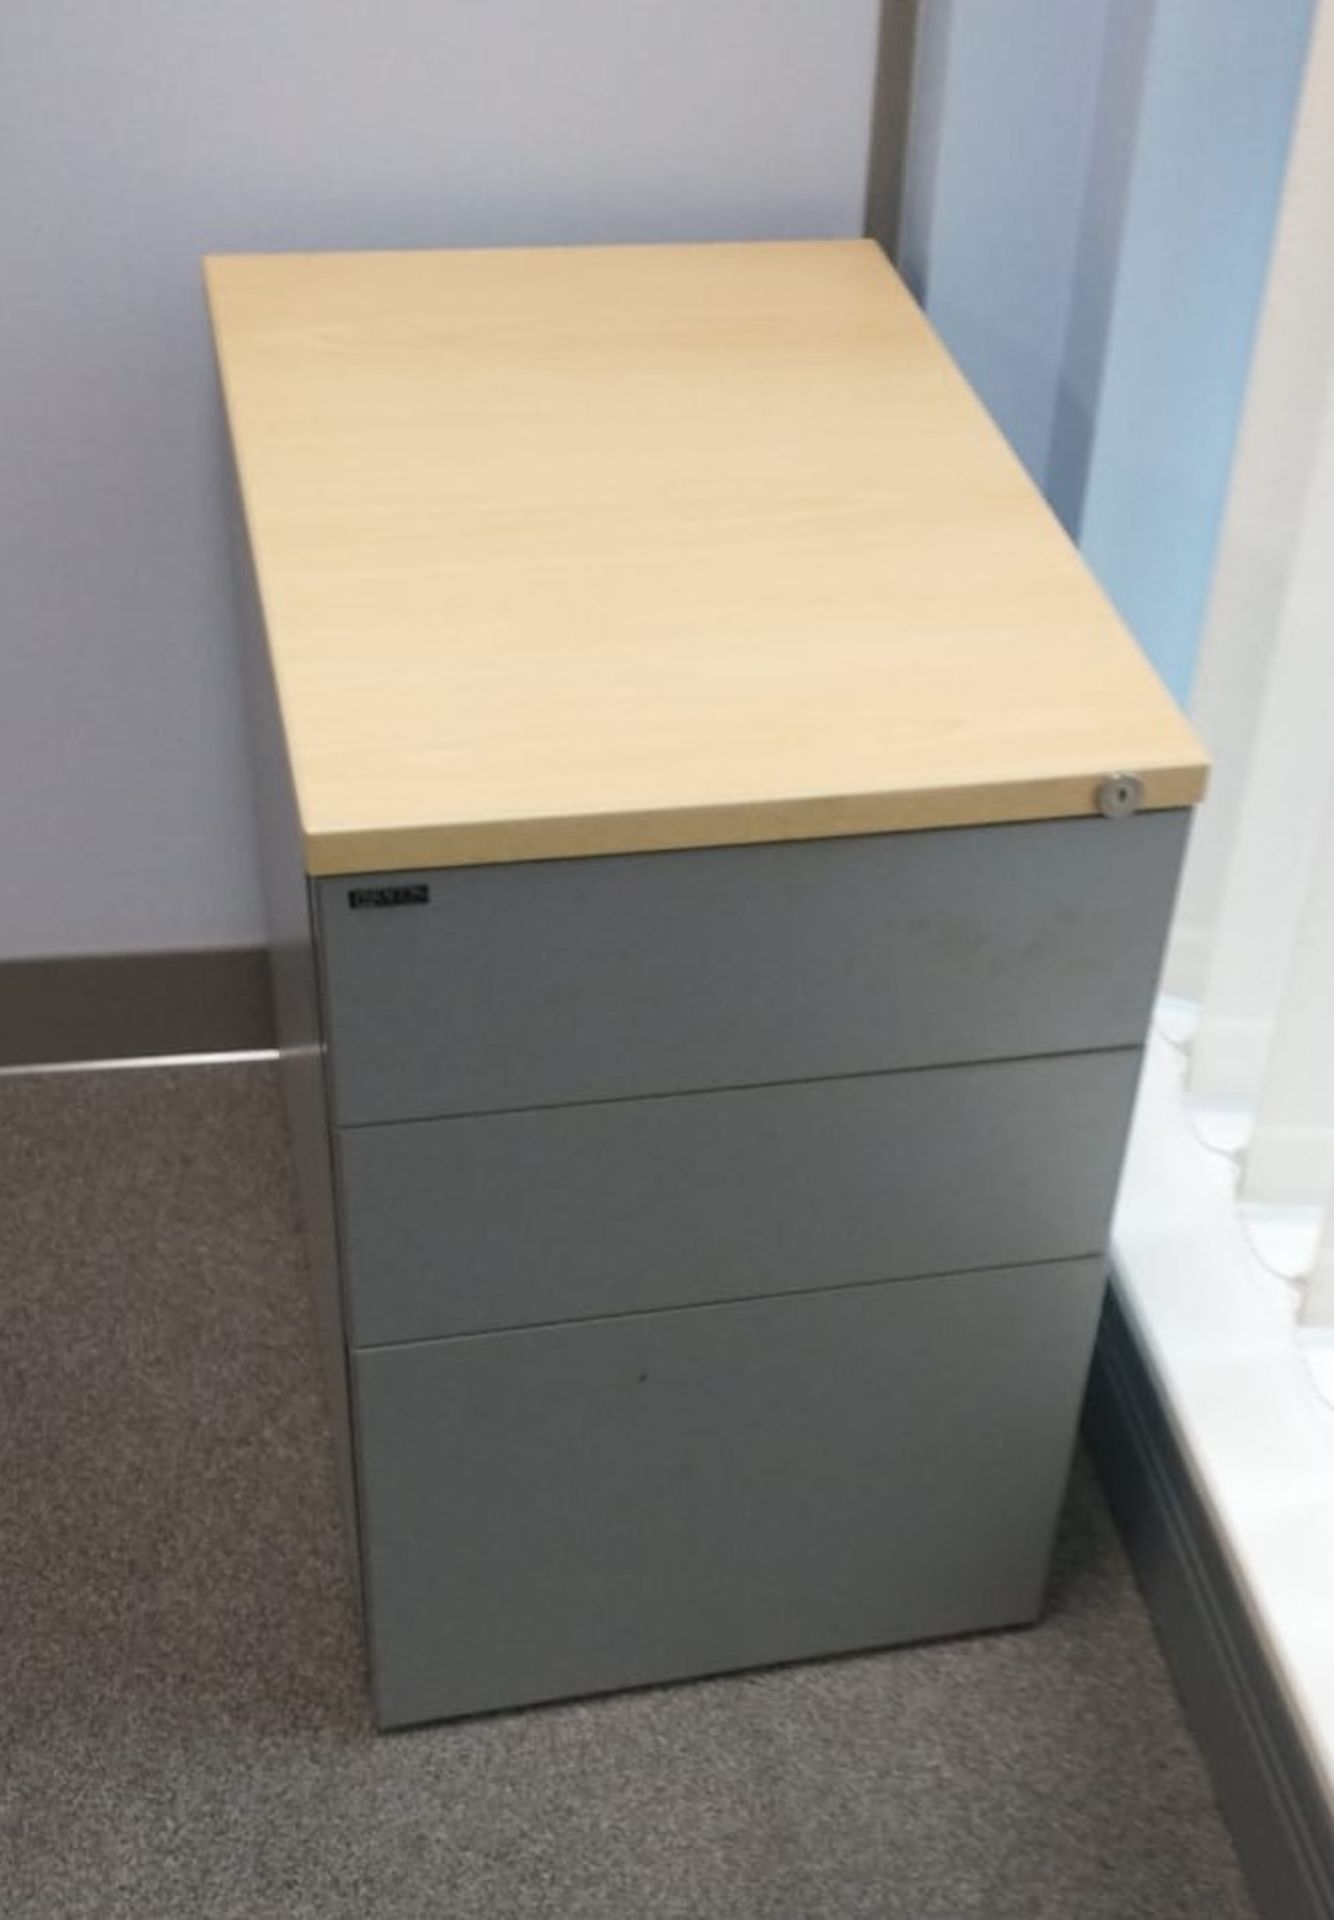 1 x Corner Office Desk With a Beech Finish, Privacy Panels and a Matching Three Drawer Pedestal - - Image 3 of 3